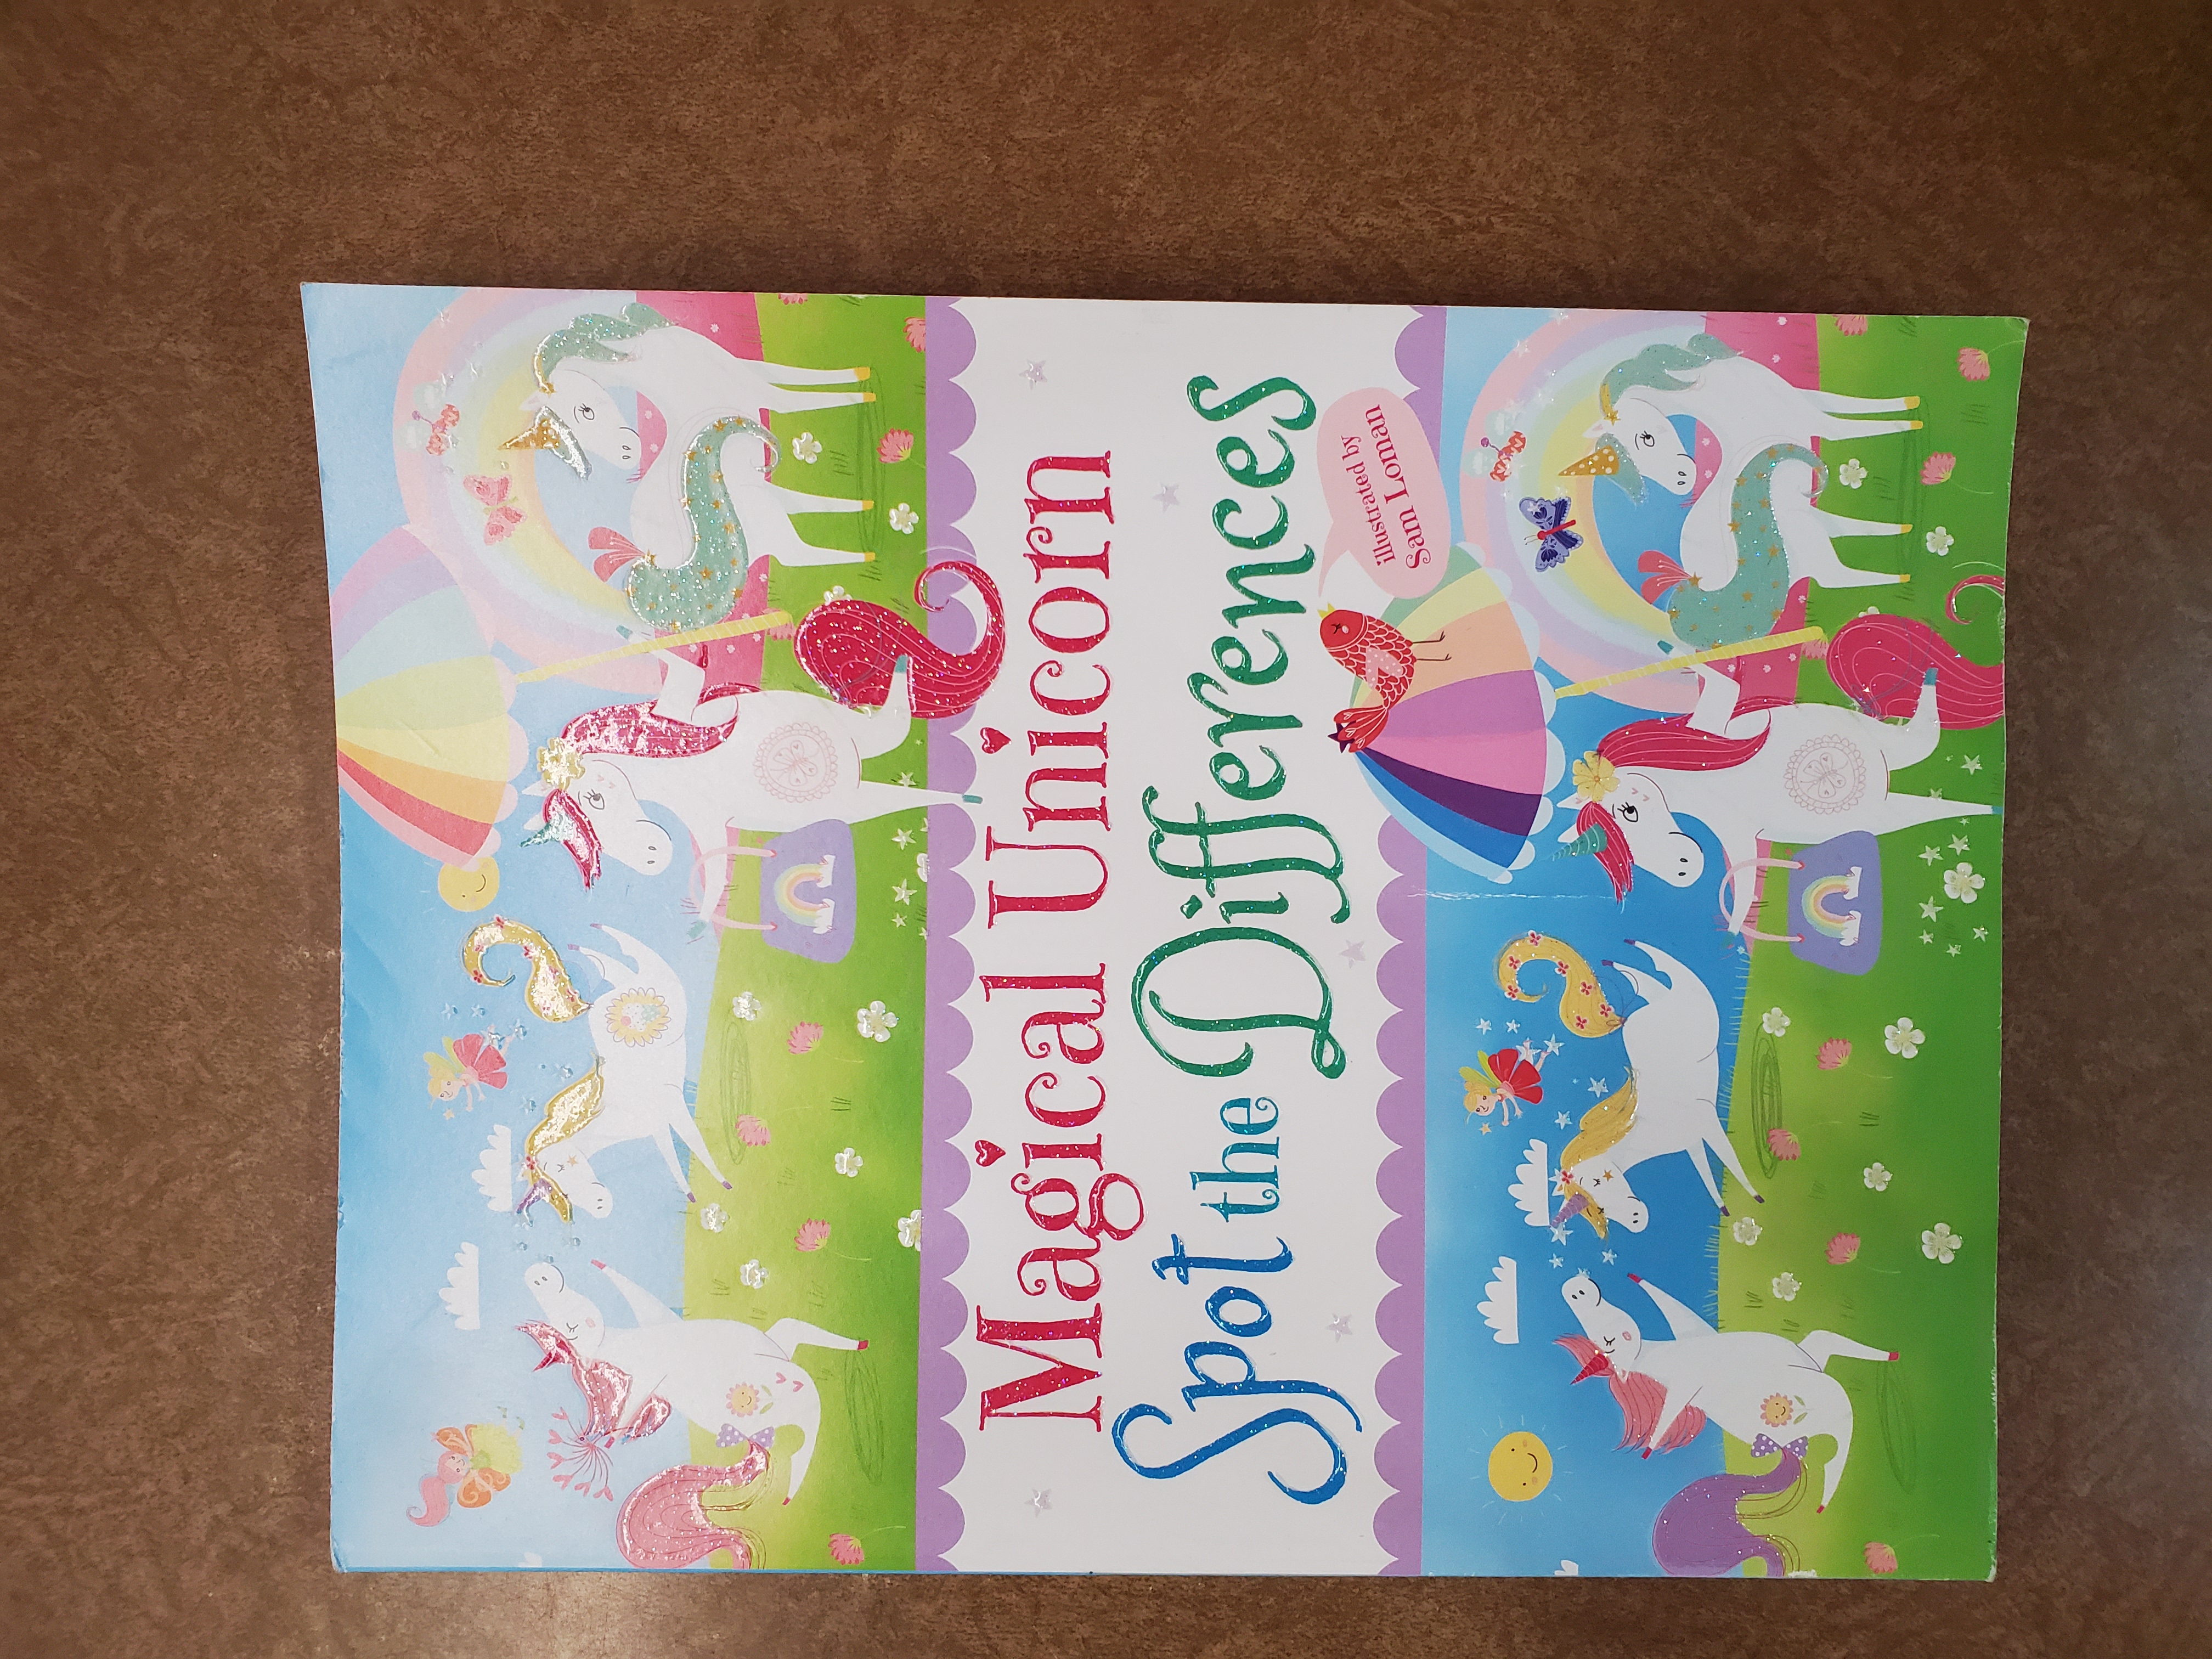 Magical Unicorn Spot the Differences - (Paperback) 9780486832296 | eBay